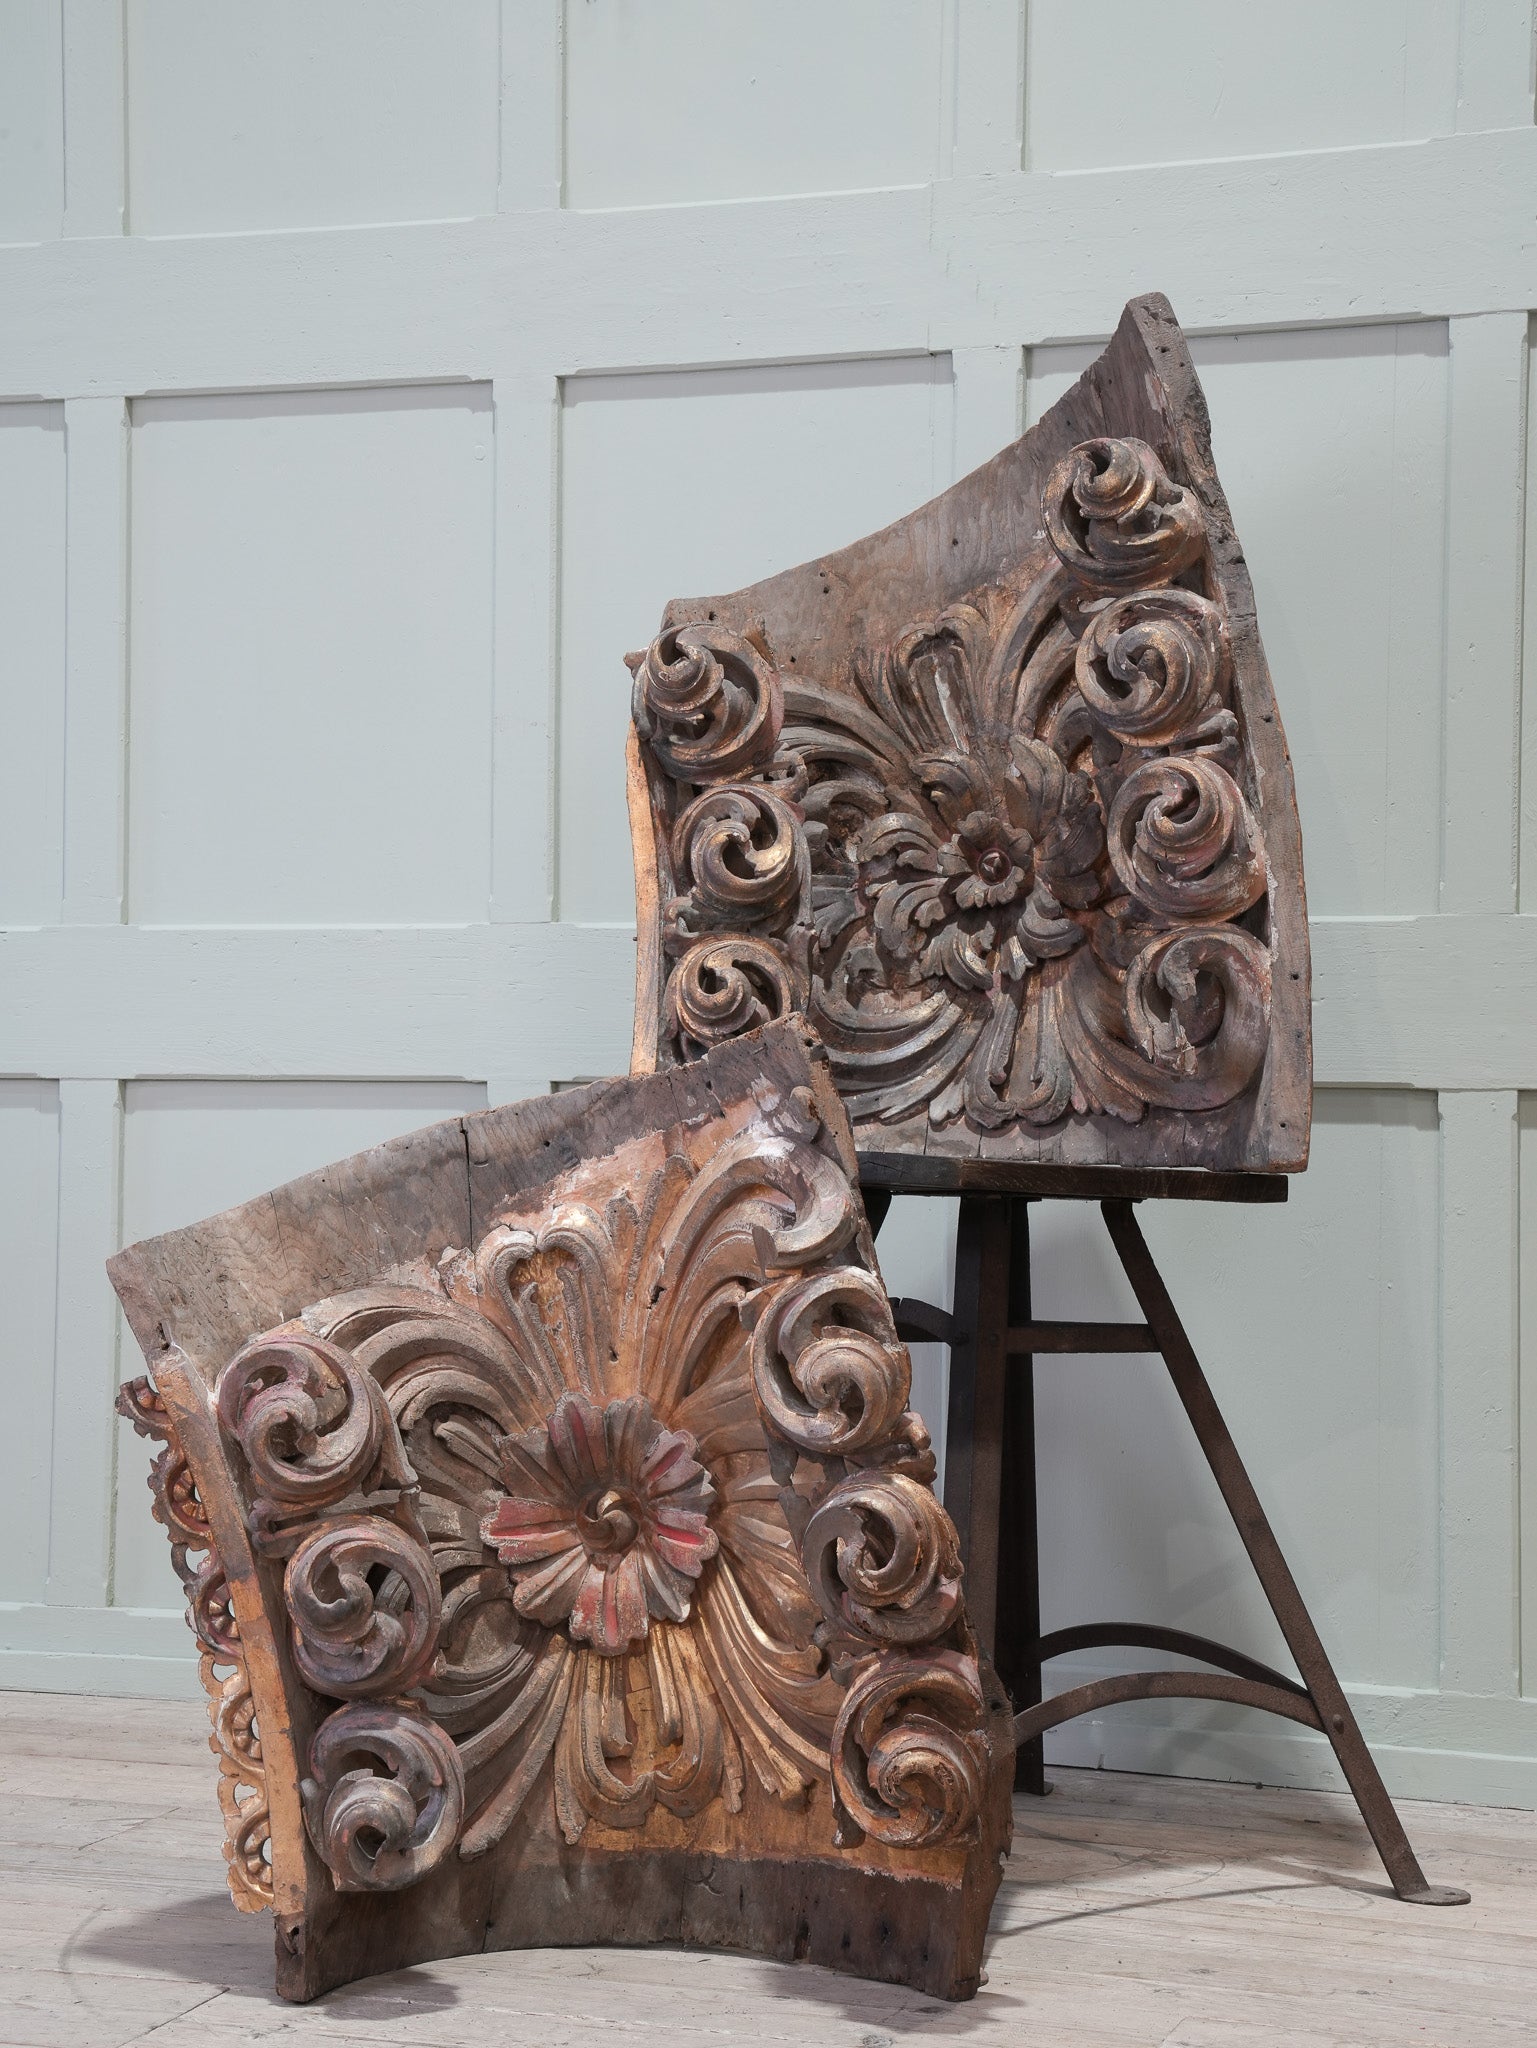 A Pair of 18th Century Portuguese Baroque Architectural Elements